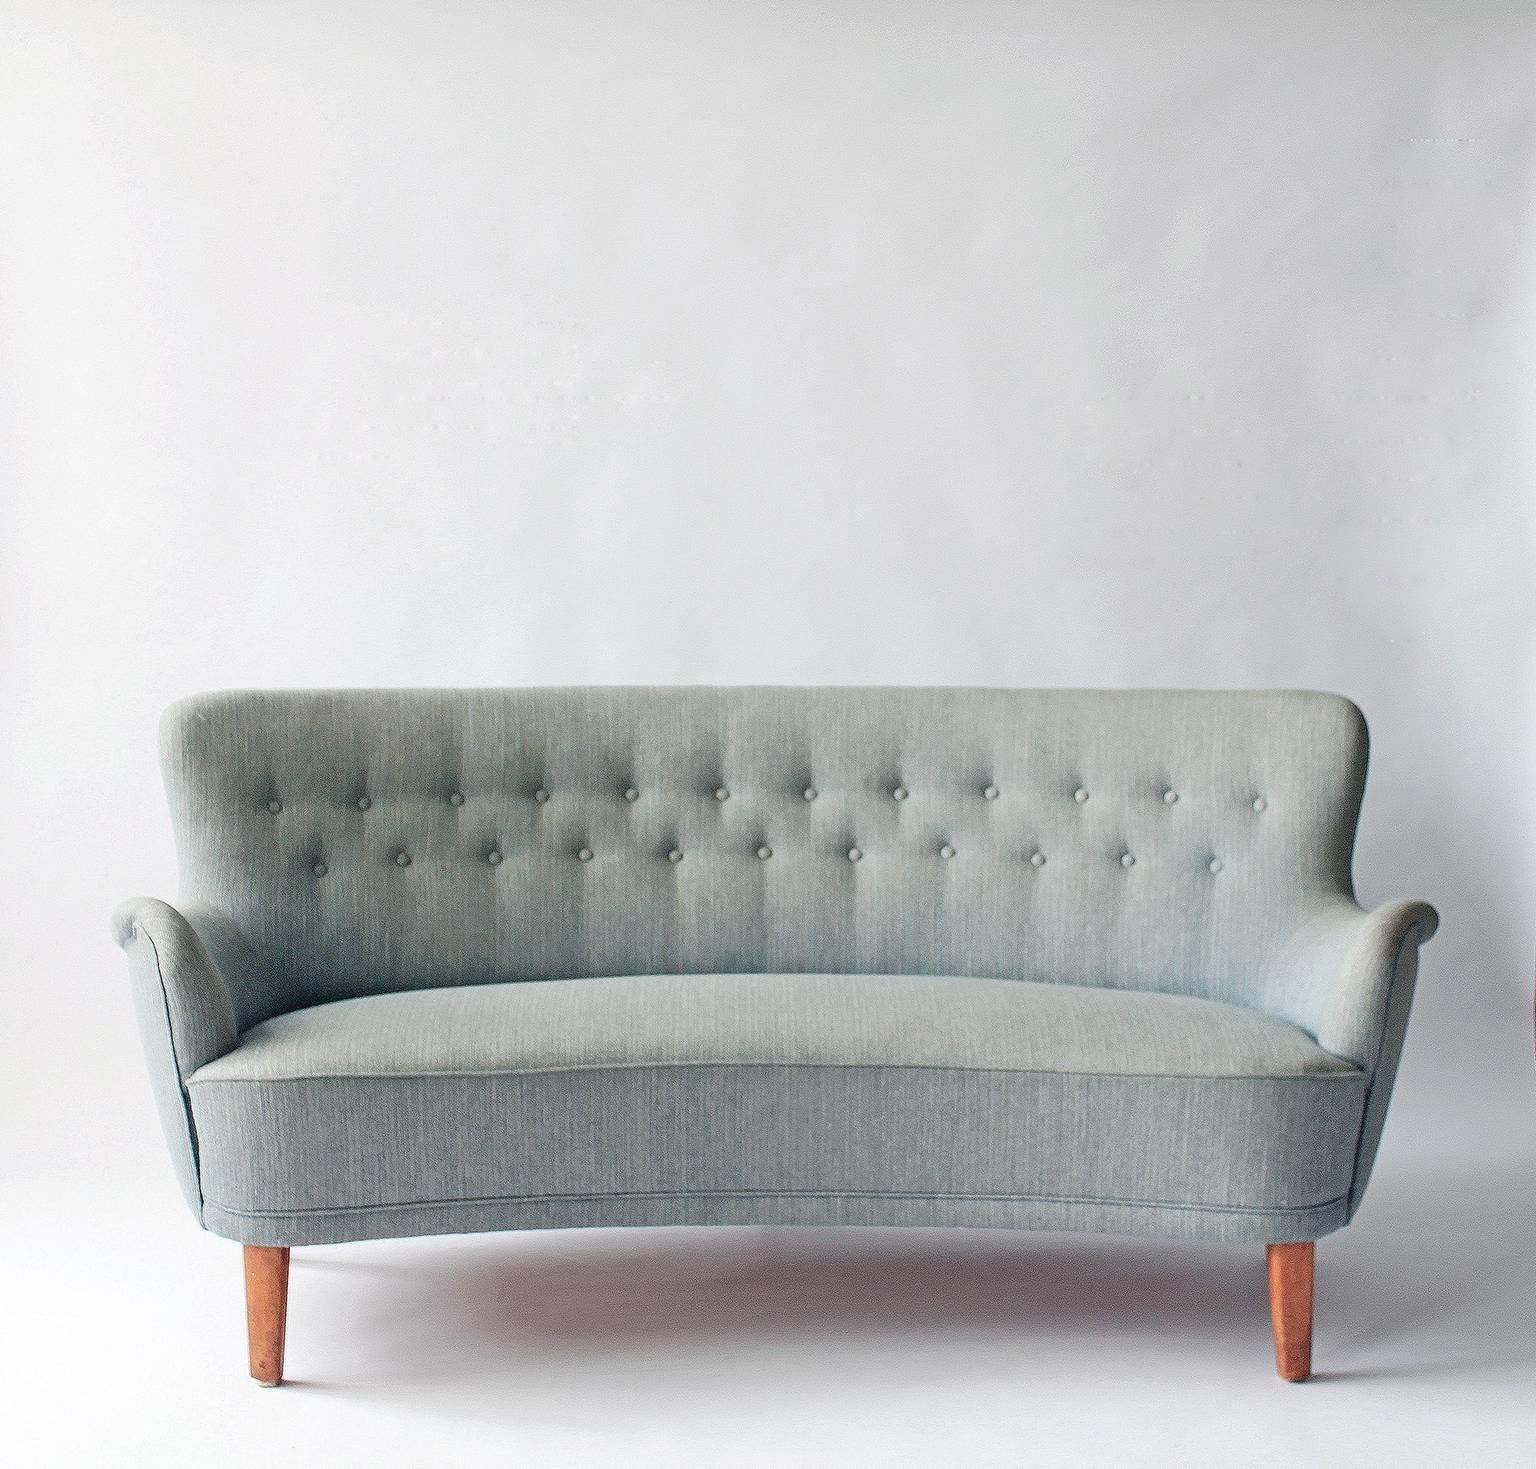 A rare Runda version of Carl Malmsten's Samsas sofa. Wonderful shape to see in the round. In good vintage condition in original wool upholstery. Gently curves at the back and lets the sitter lean back at a more casual angle than the more common